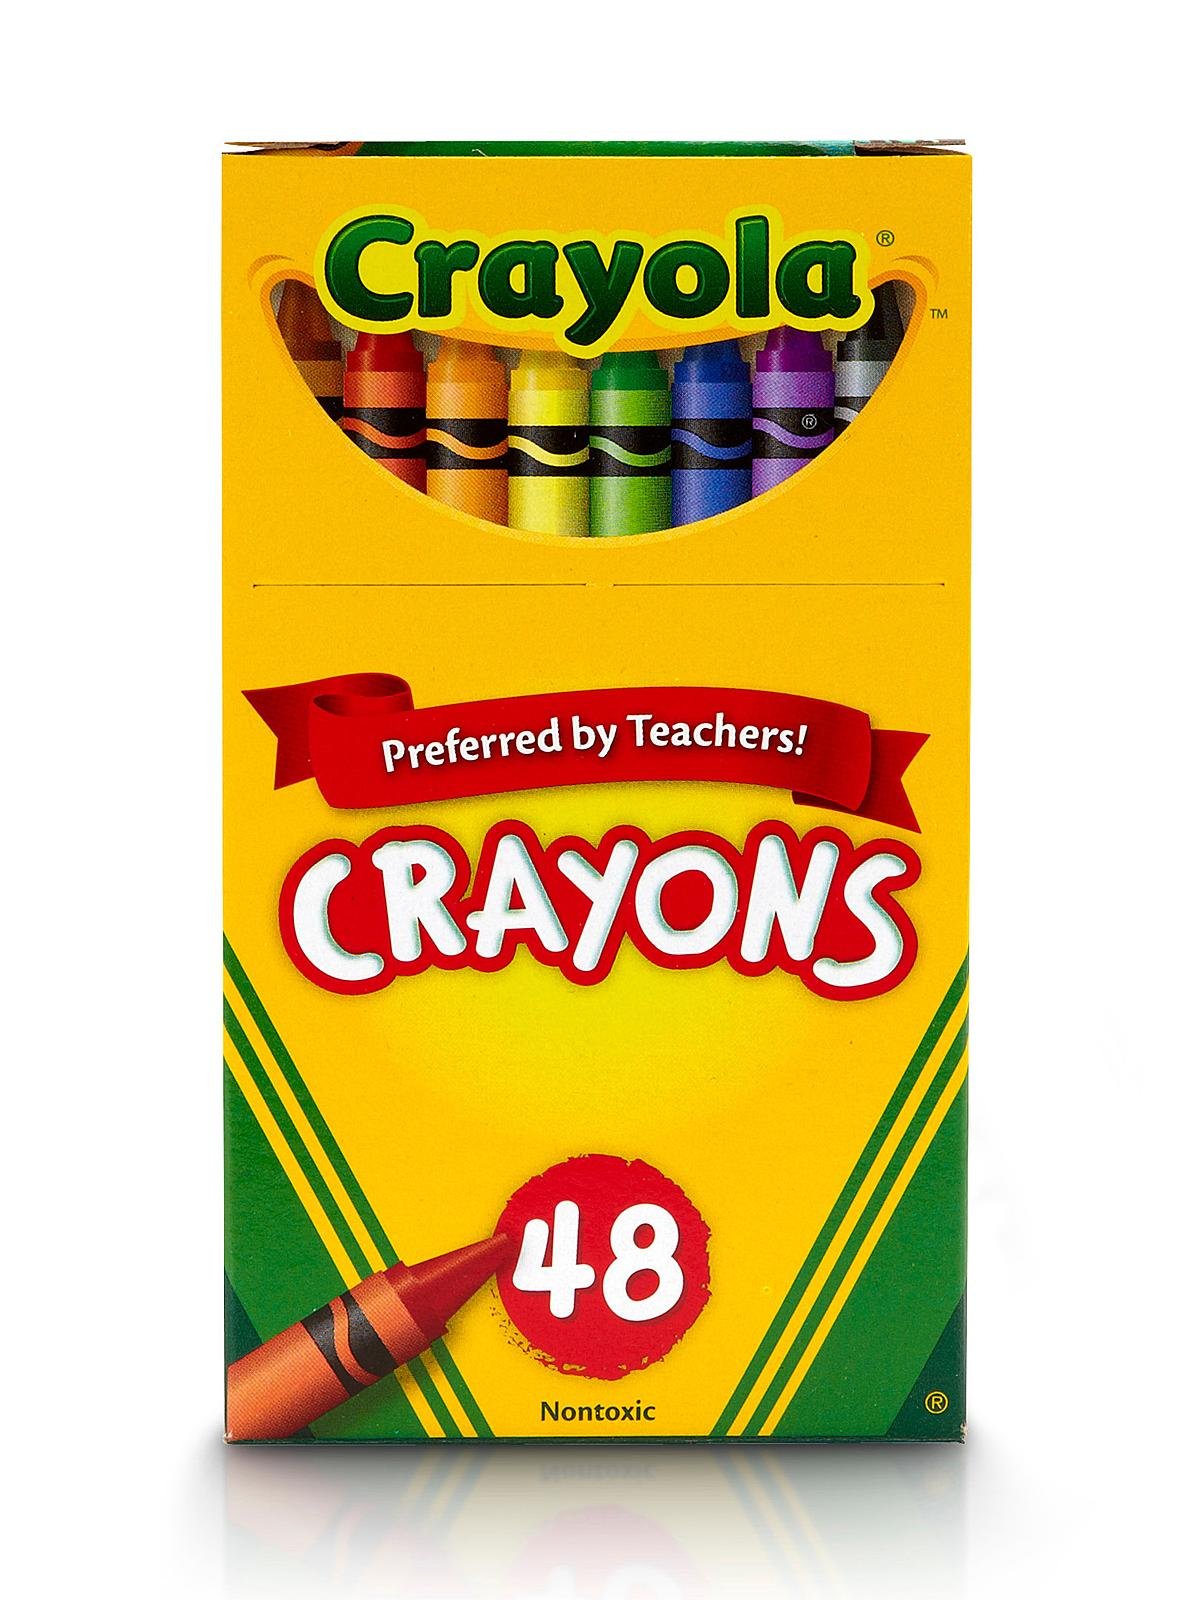 64 Pack of Crayons - Search Shopping